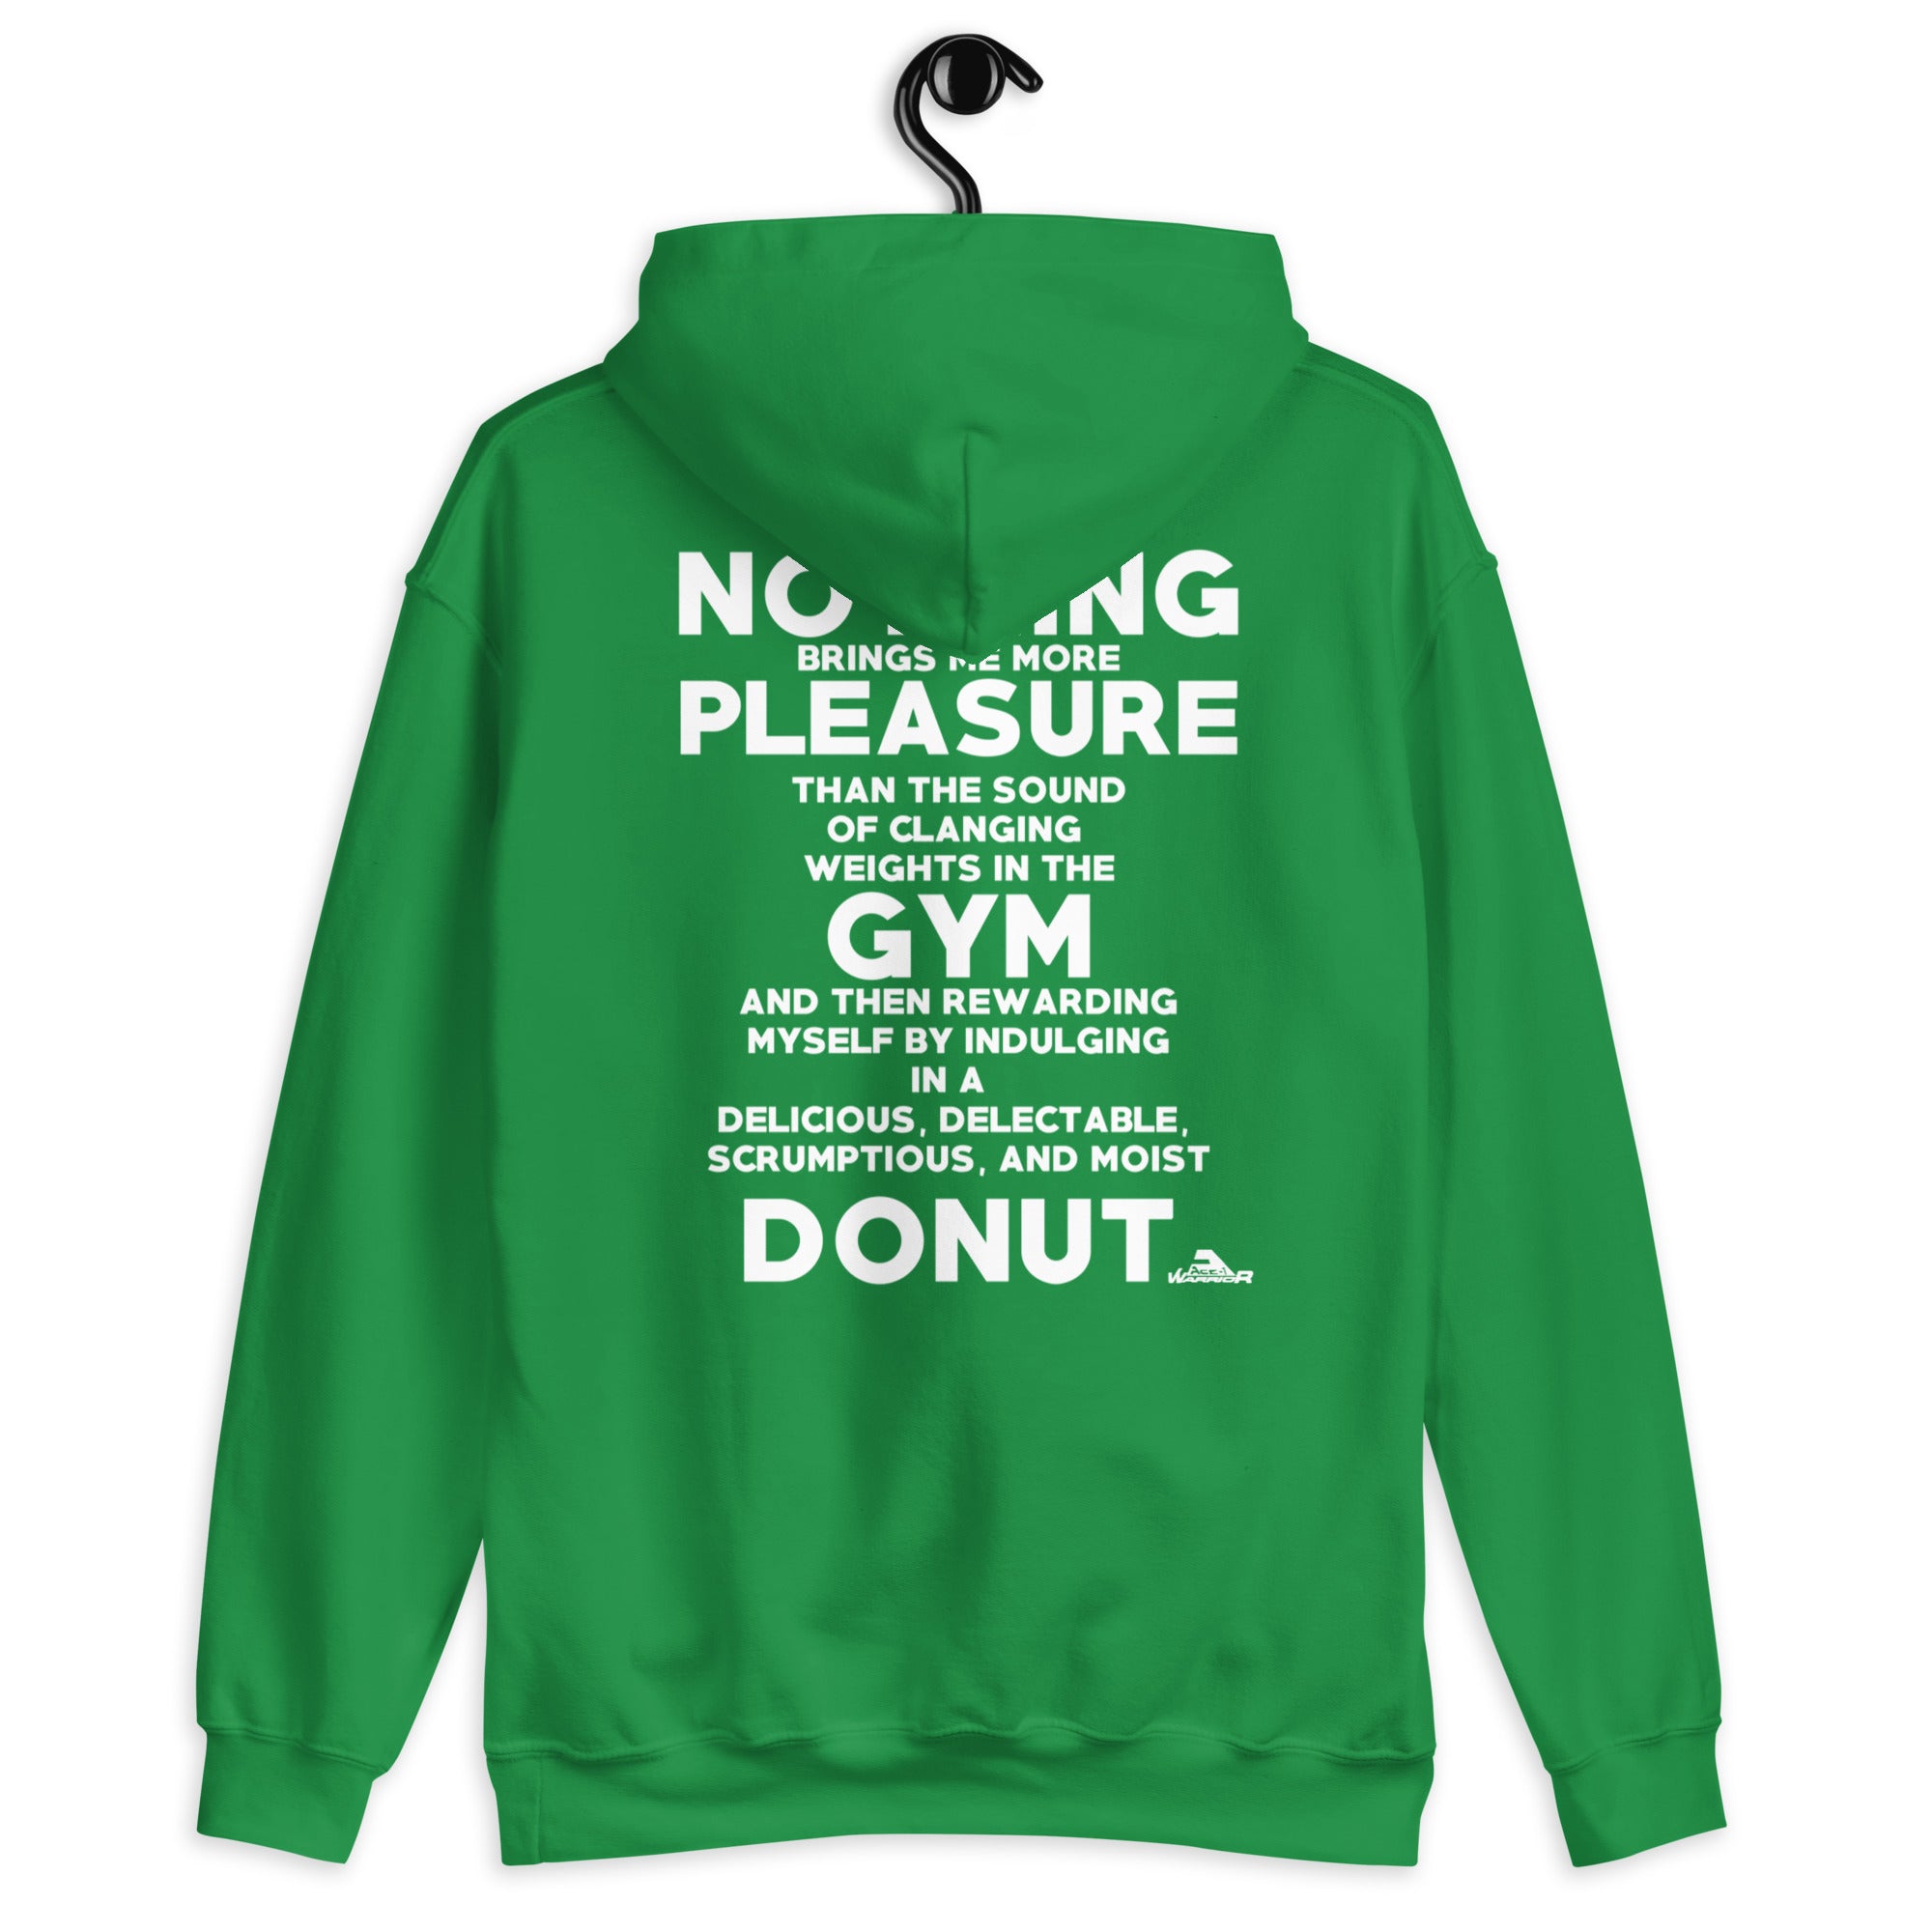 Gym and Donut Addict Unisex Hoodie with Quote on Back.